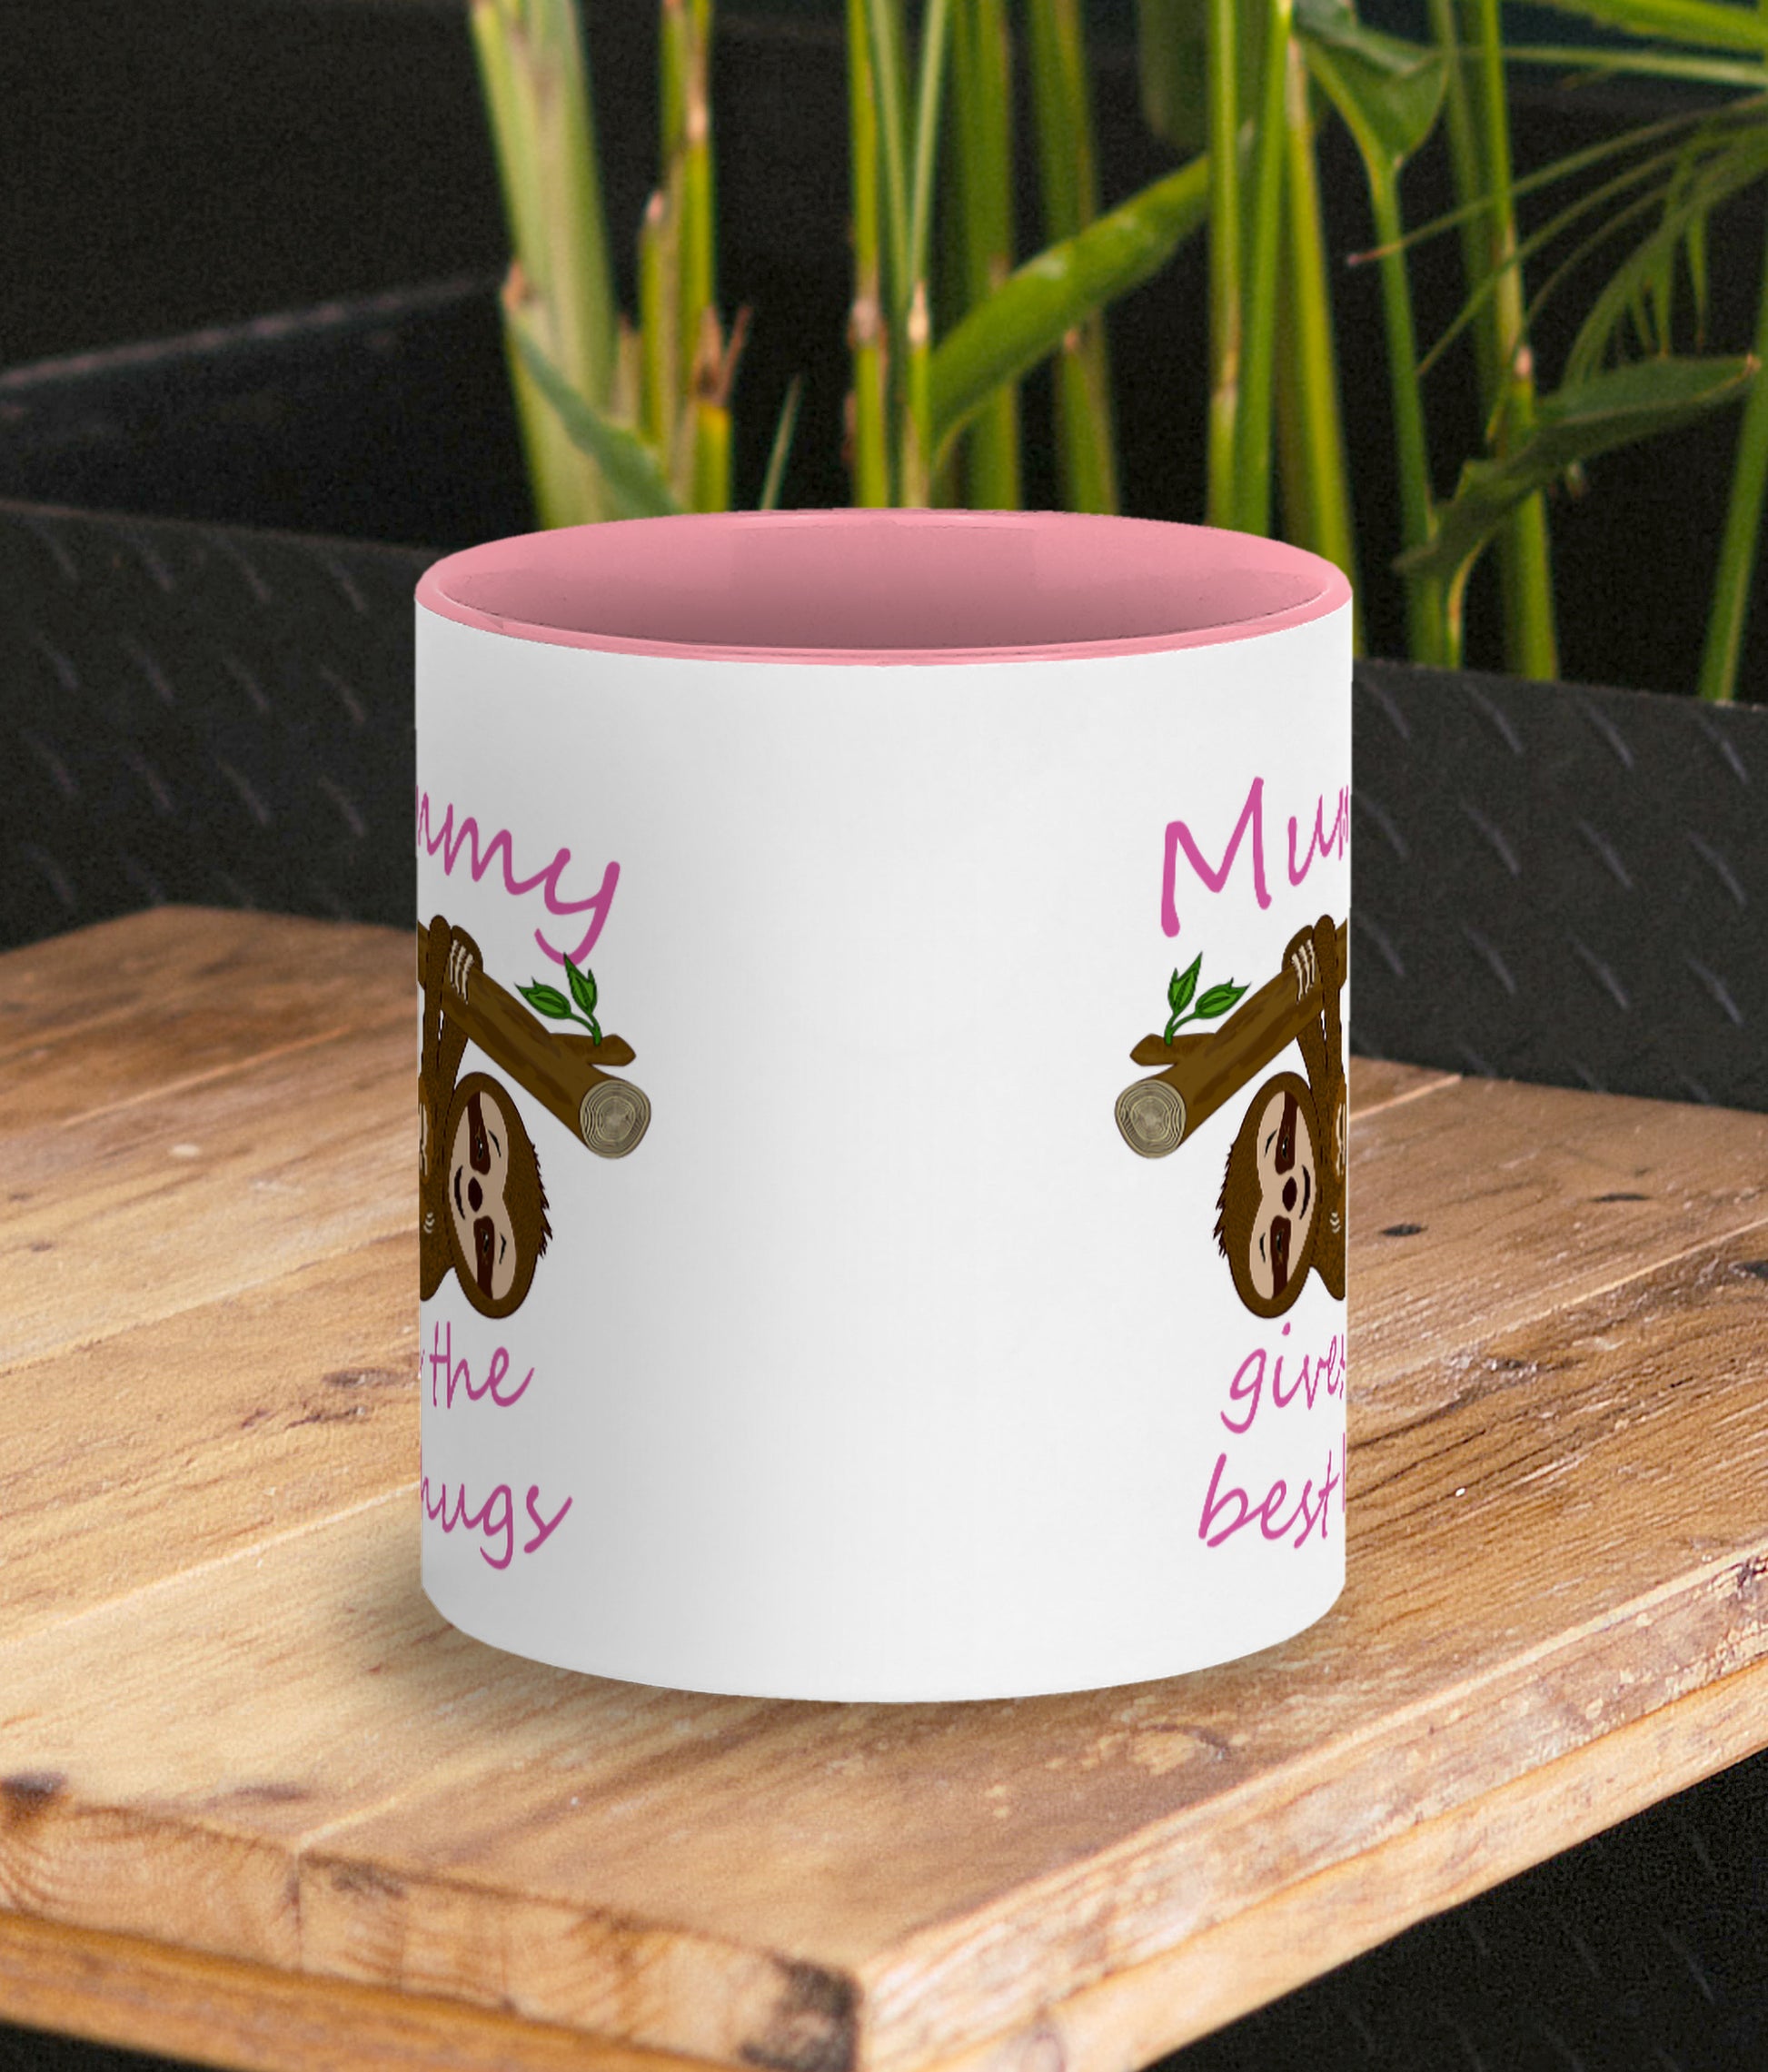 Personalised Tea / Coffee cup gift. Cute cuddly three toed sloths on a branch. Mum and baby. Two tone white with pink ceramic coffee mug. Customisable name reads Mummy gives the best hugs in pink font. Same design on both sides of mug shown by photo.